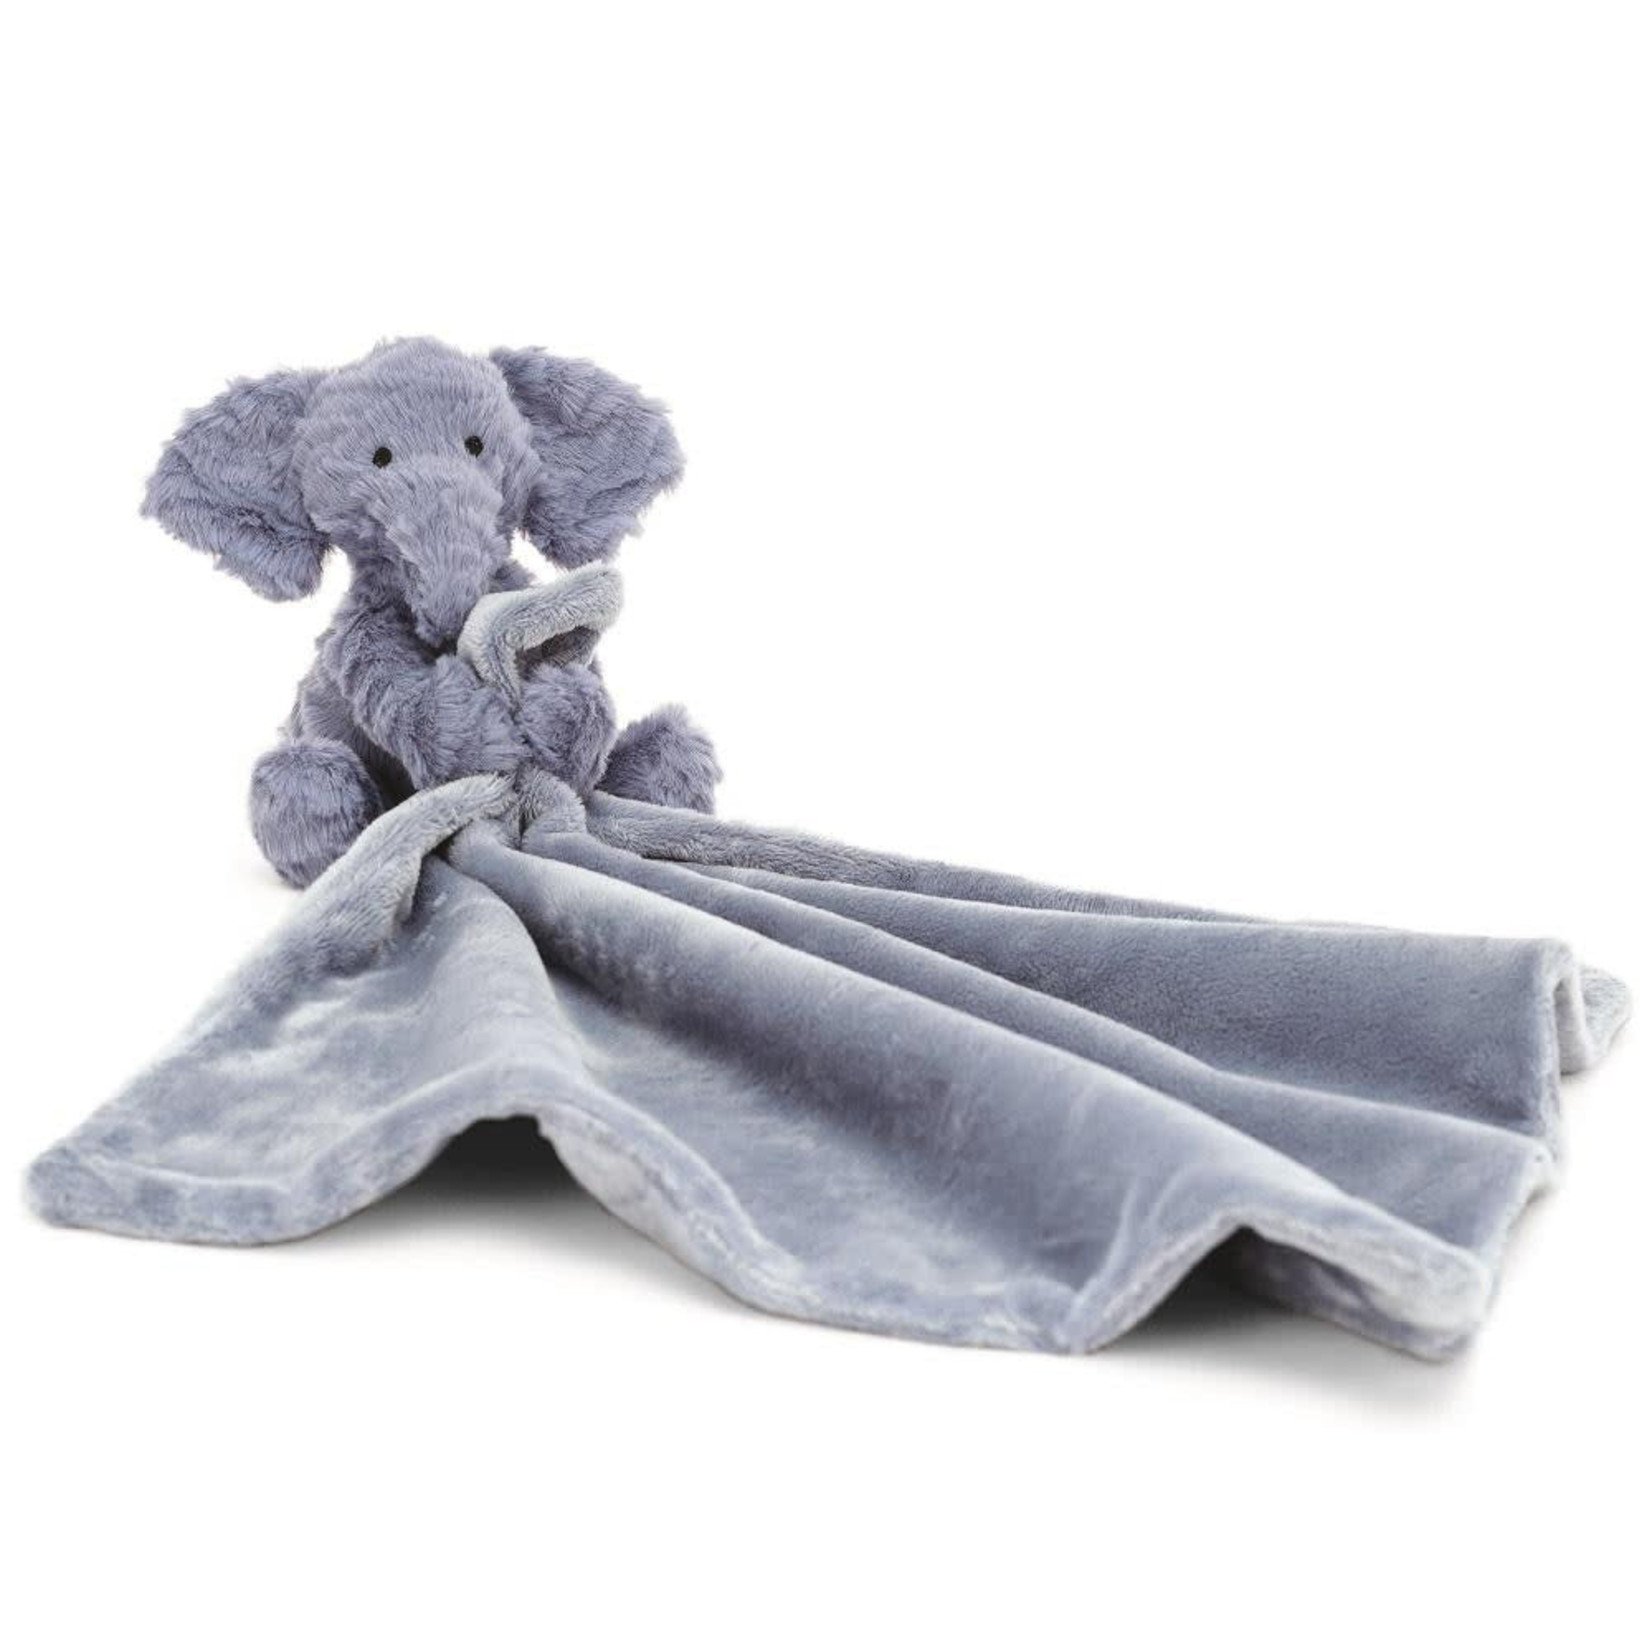 Jellycat Jellycat  Fuddlewuddle Elephant Soother